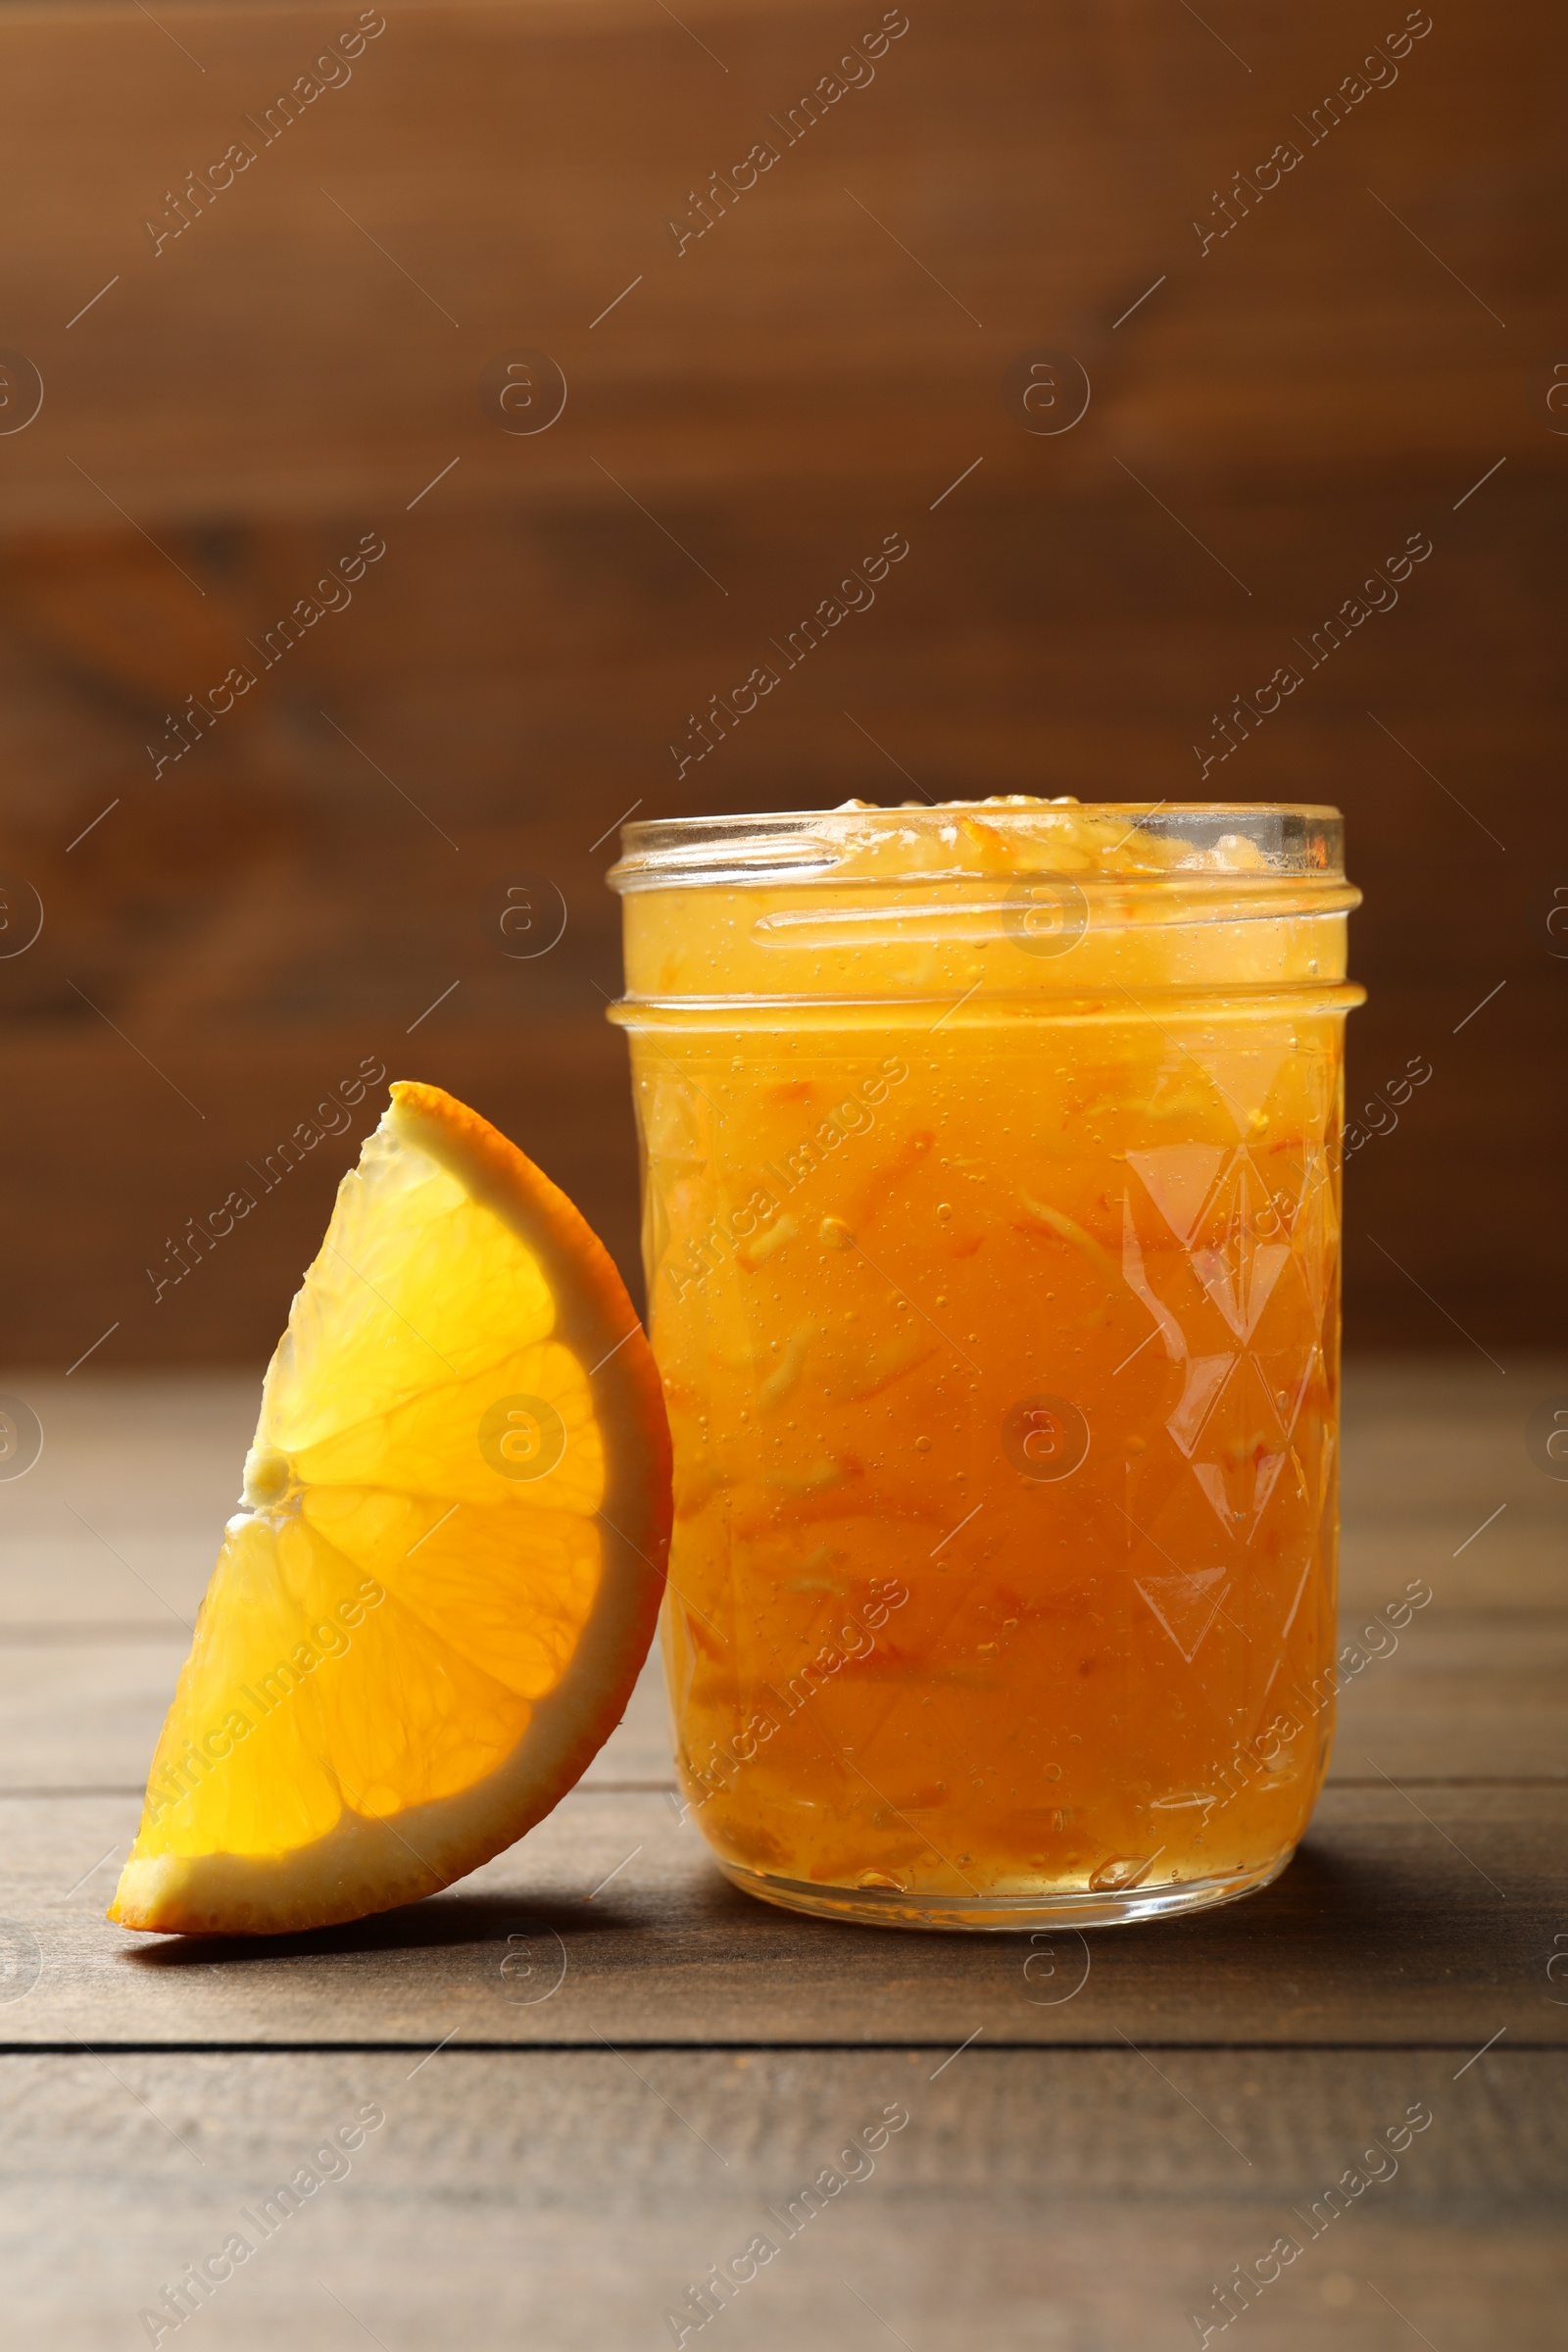 Photo of Delicious orange marmalade and citrus fruit slice on wooden table